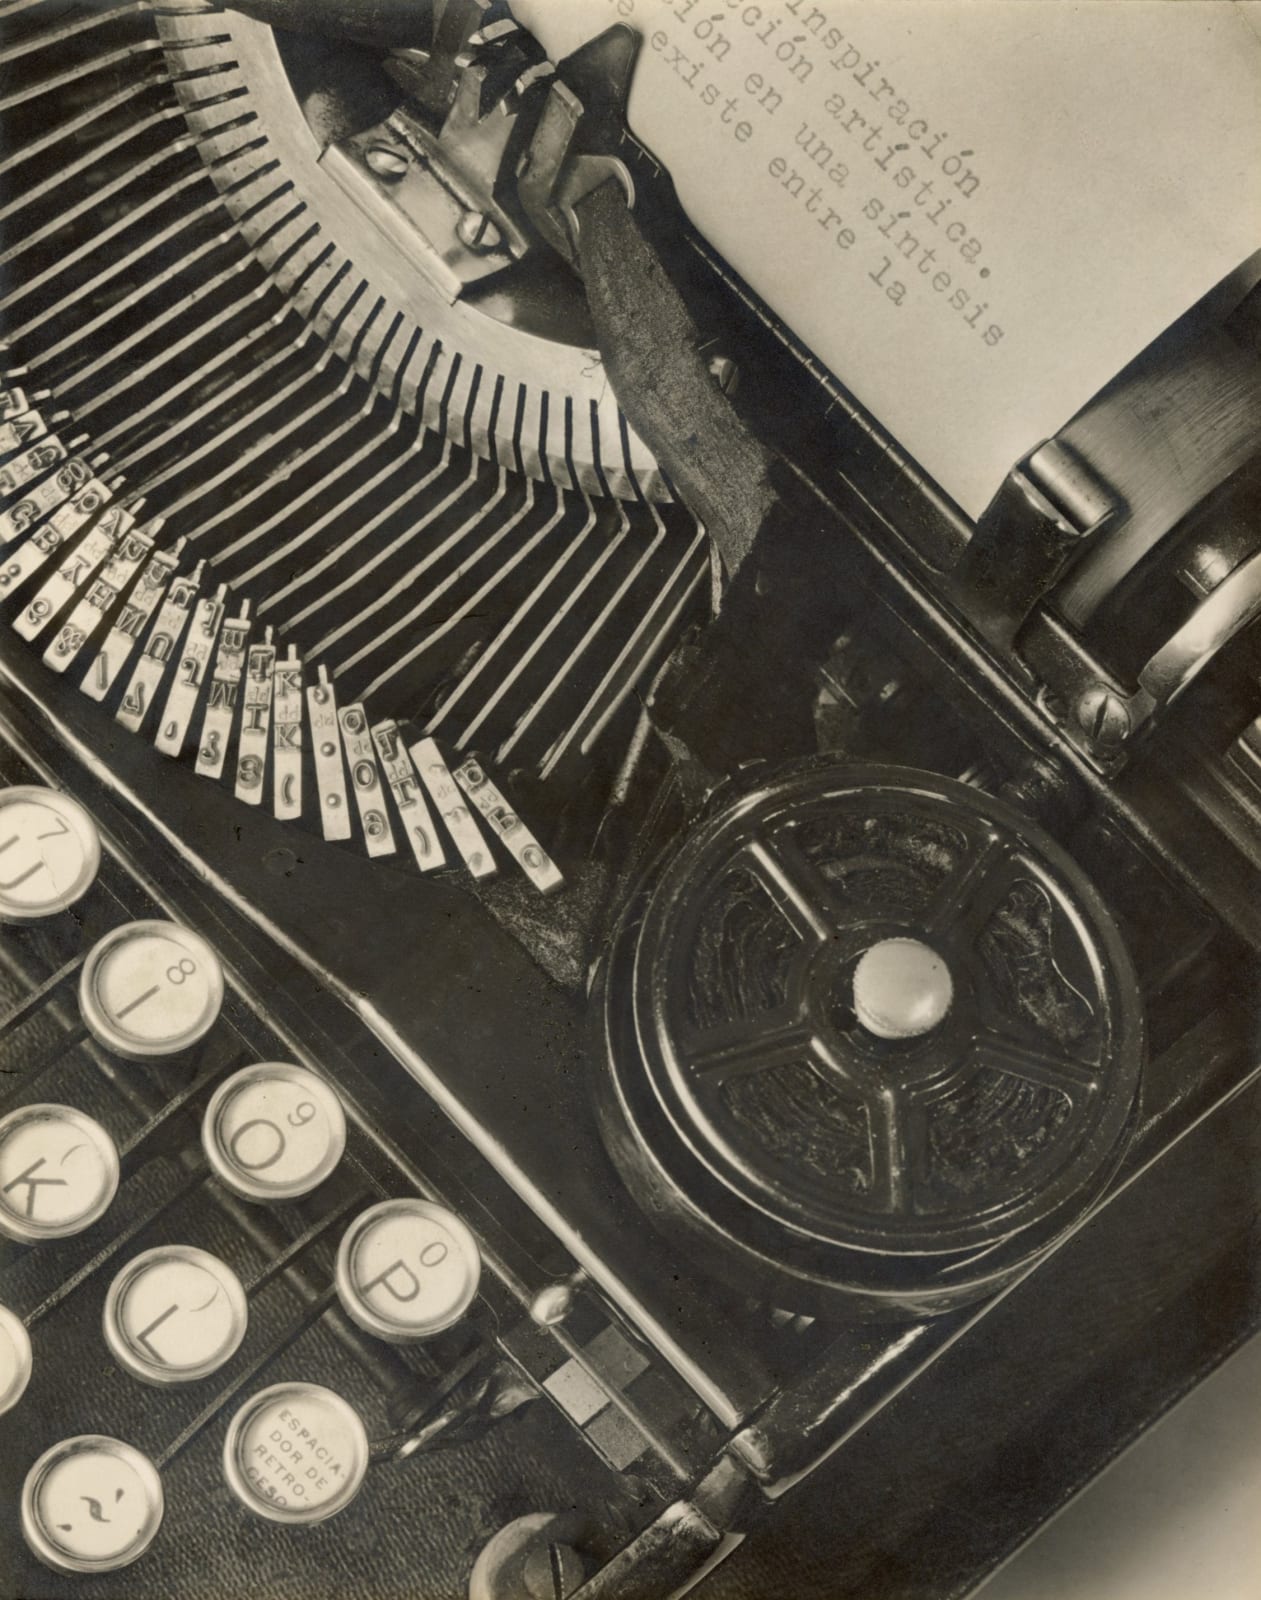 close-up photograph of typewriter with writing in Spanish on paper by Tina Modotti